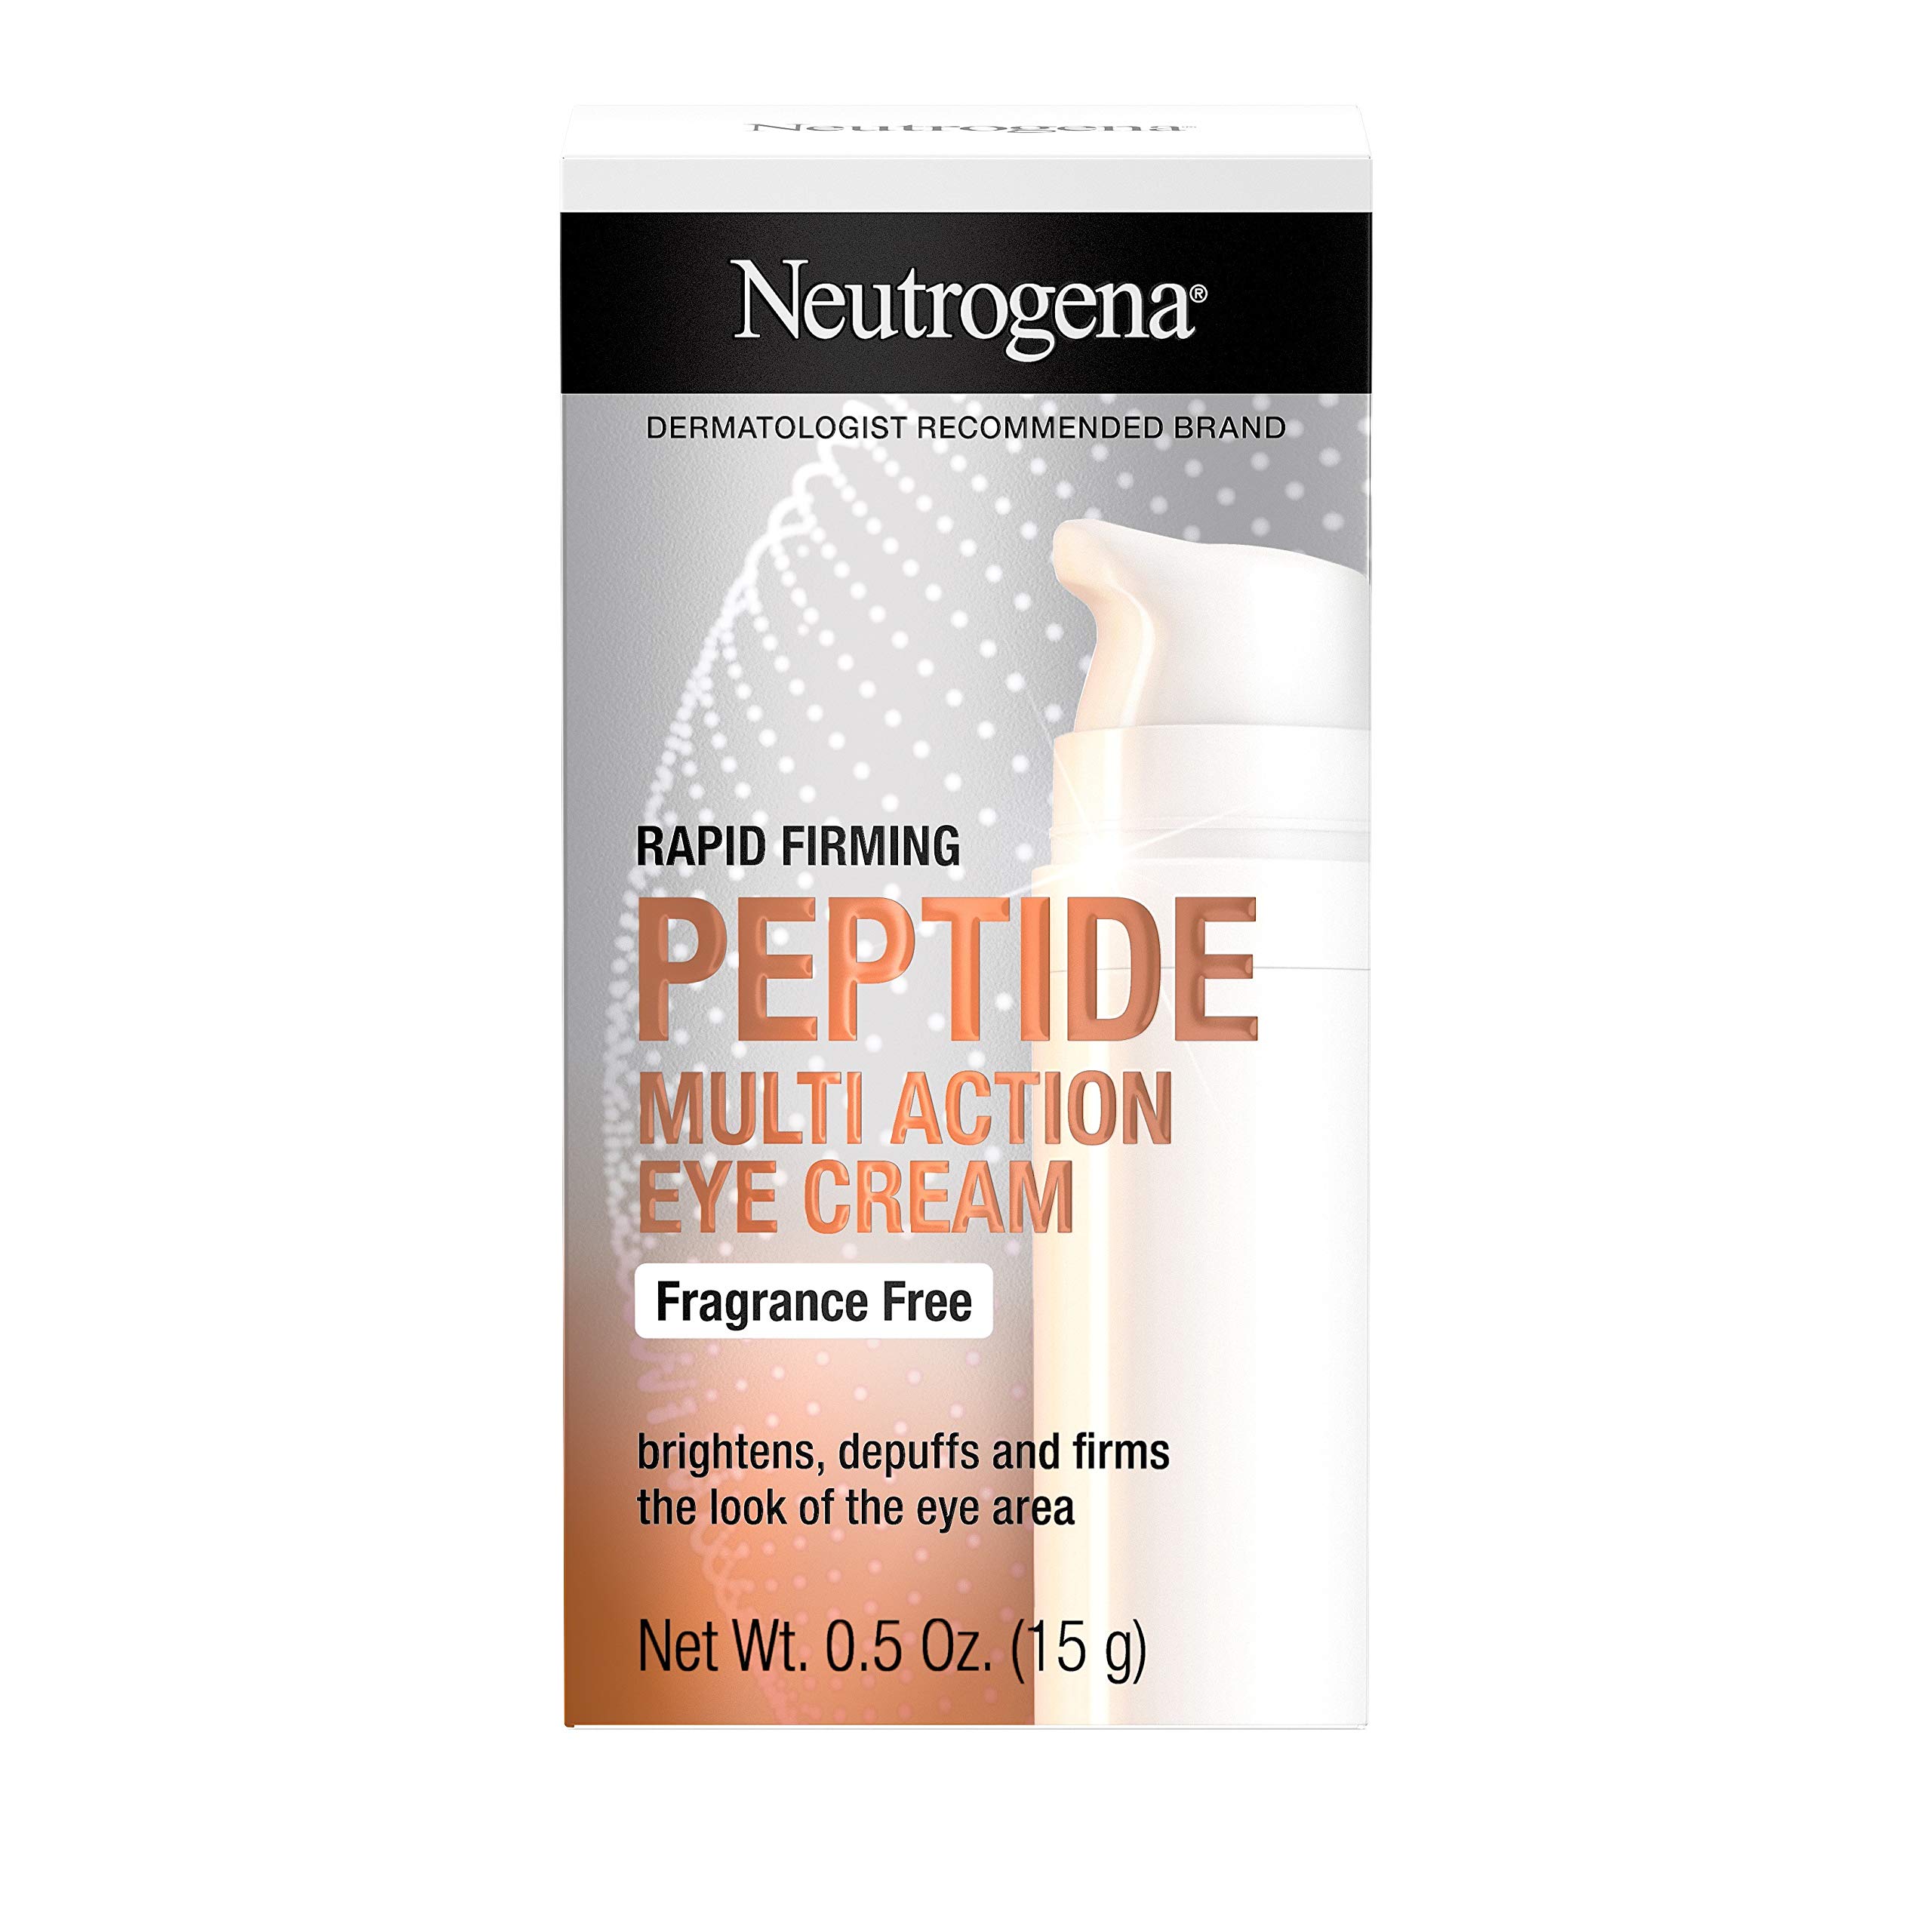 Neutrogena Rapid Firming Peptide Multi Action Depuffing & Brightening Eye Cream, Hydrating & Fragrance-Free Eye Firming Cream to visibly Reduce Fine Lines & Puffiness, 0.5 fl. oz (Pack of 4)